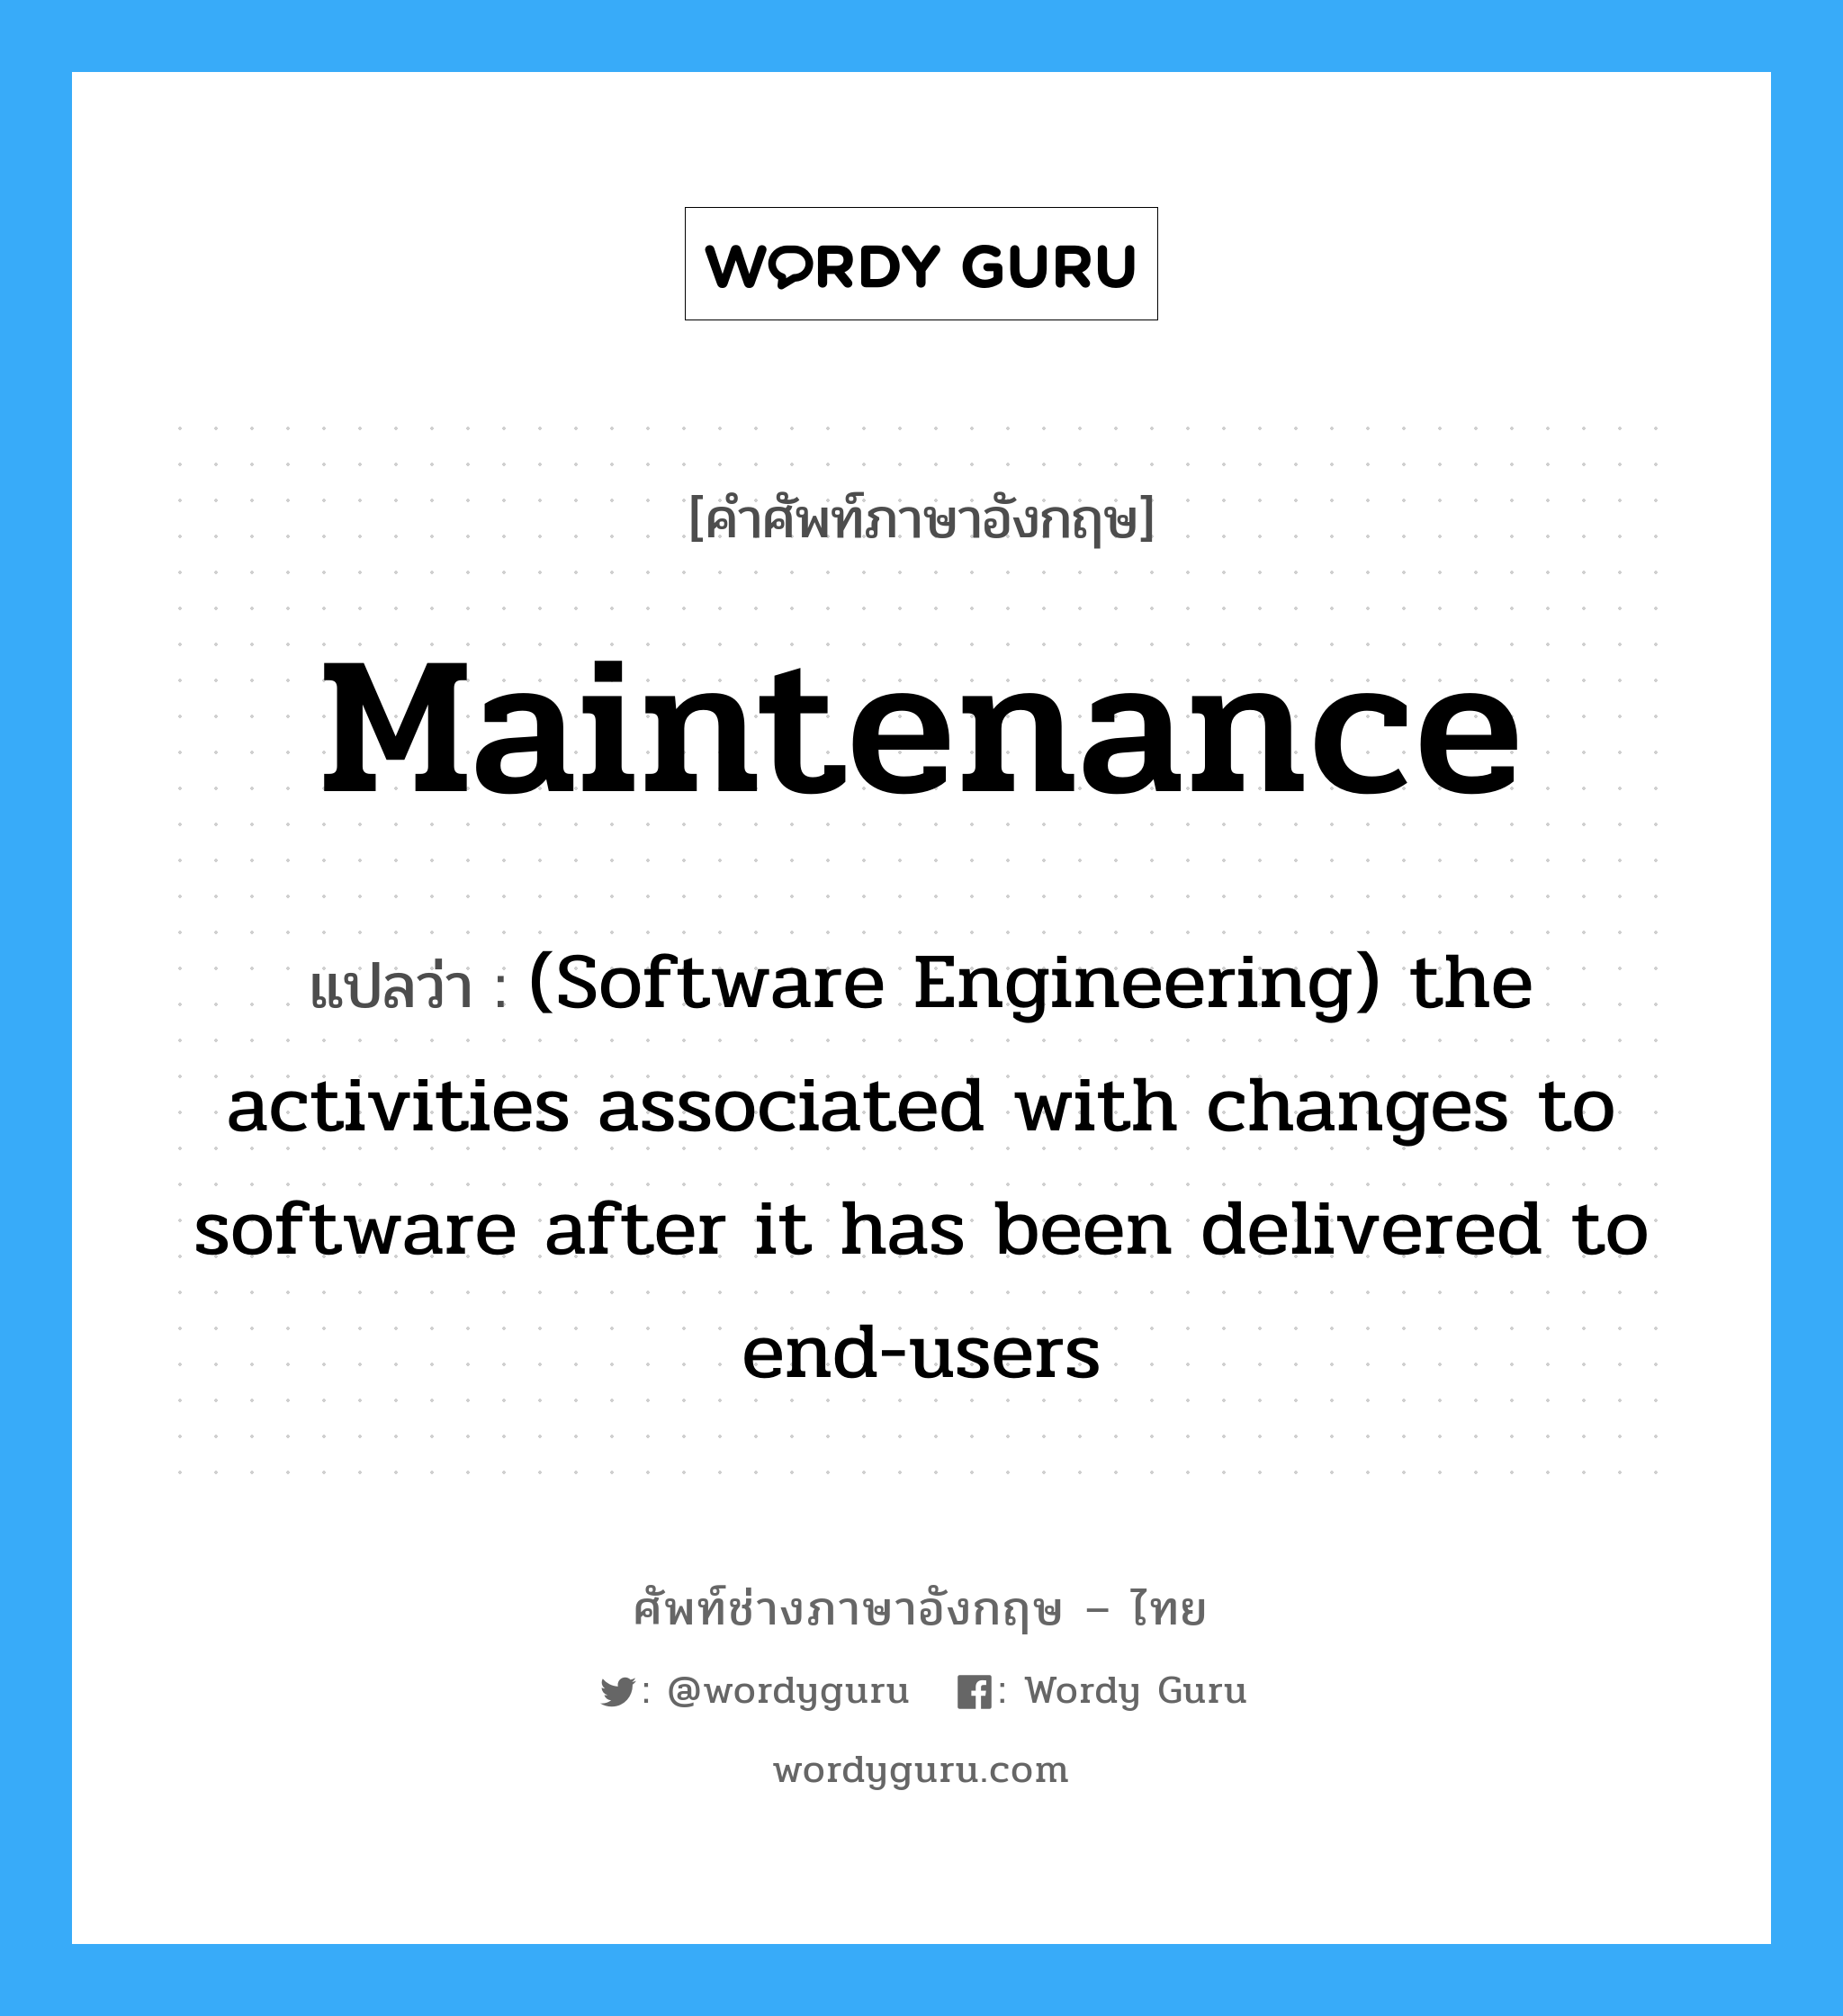 Maintenance แปลว่า?, คำศัพท์ช่างภาษาอังกฤษ - ไทย Maintenance คำศัพท์ภาษาอังกฤษ Maintenance แปลว่า (Software Engineering) the activities associated with changes to software after it has been delivered to end-users